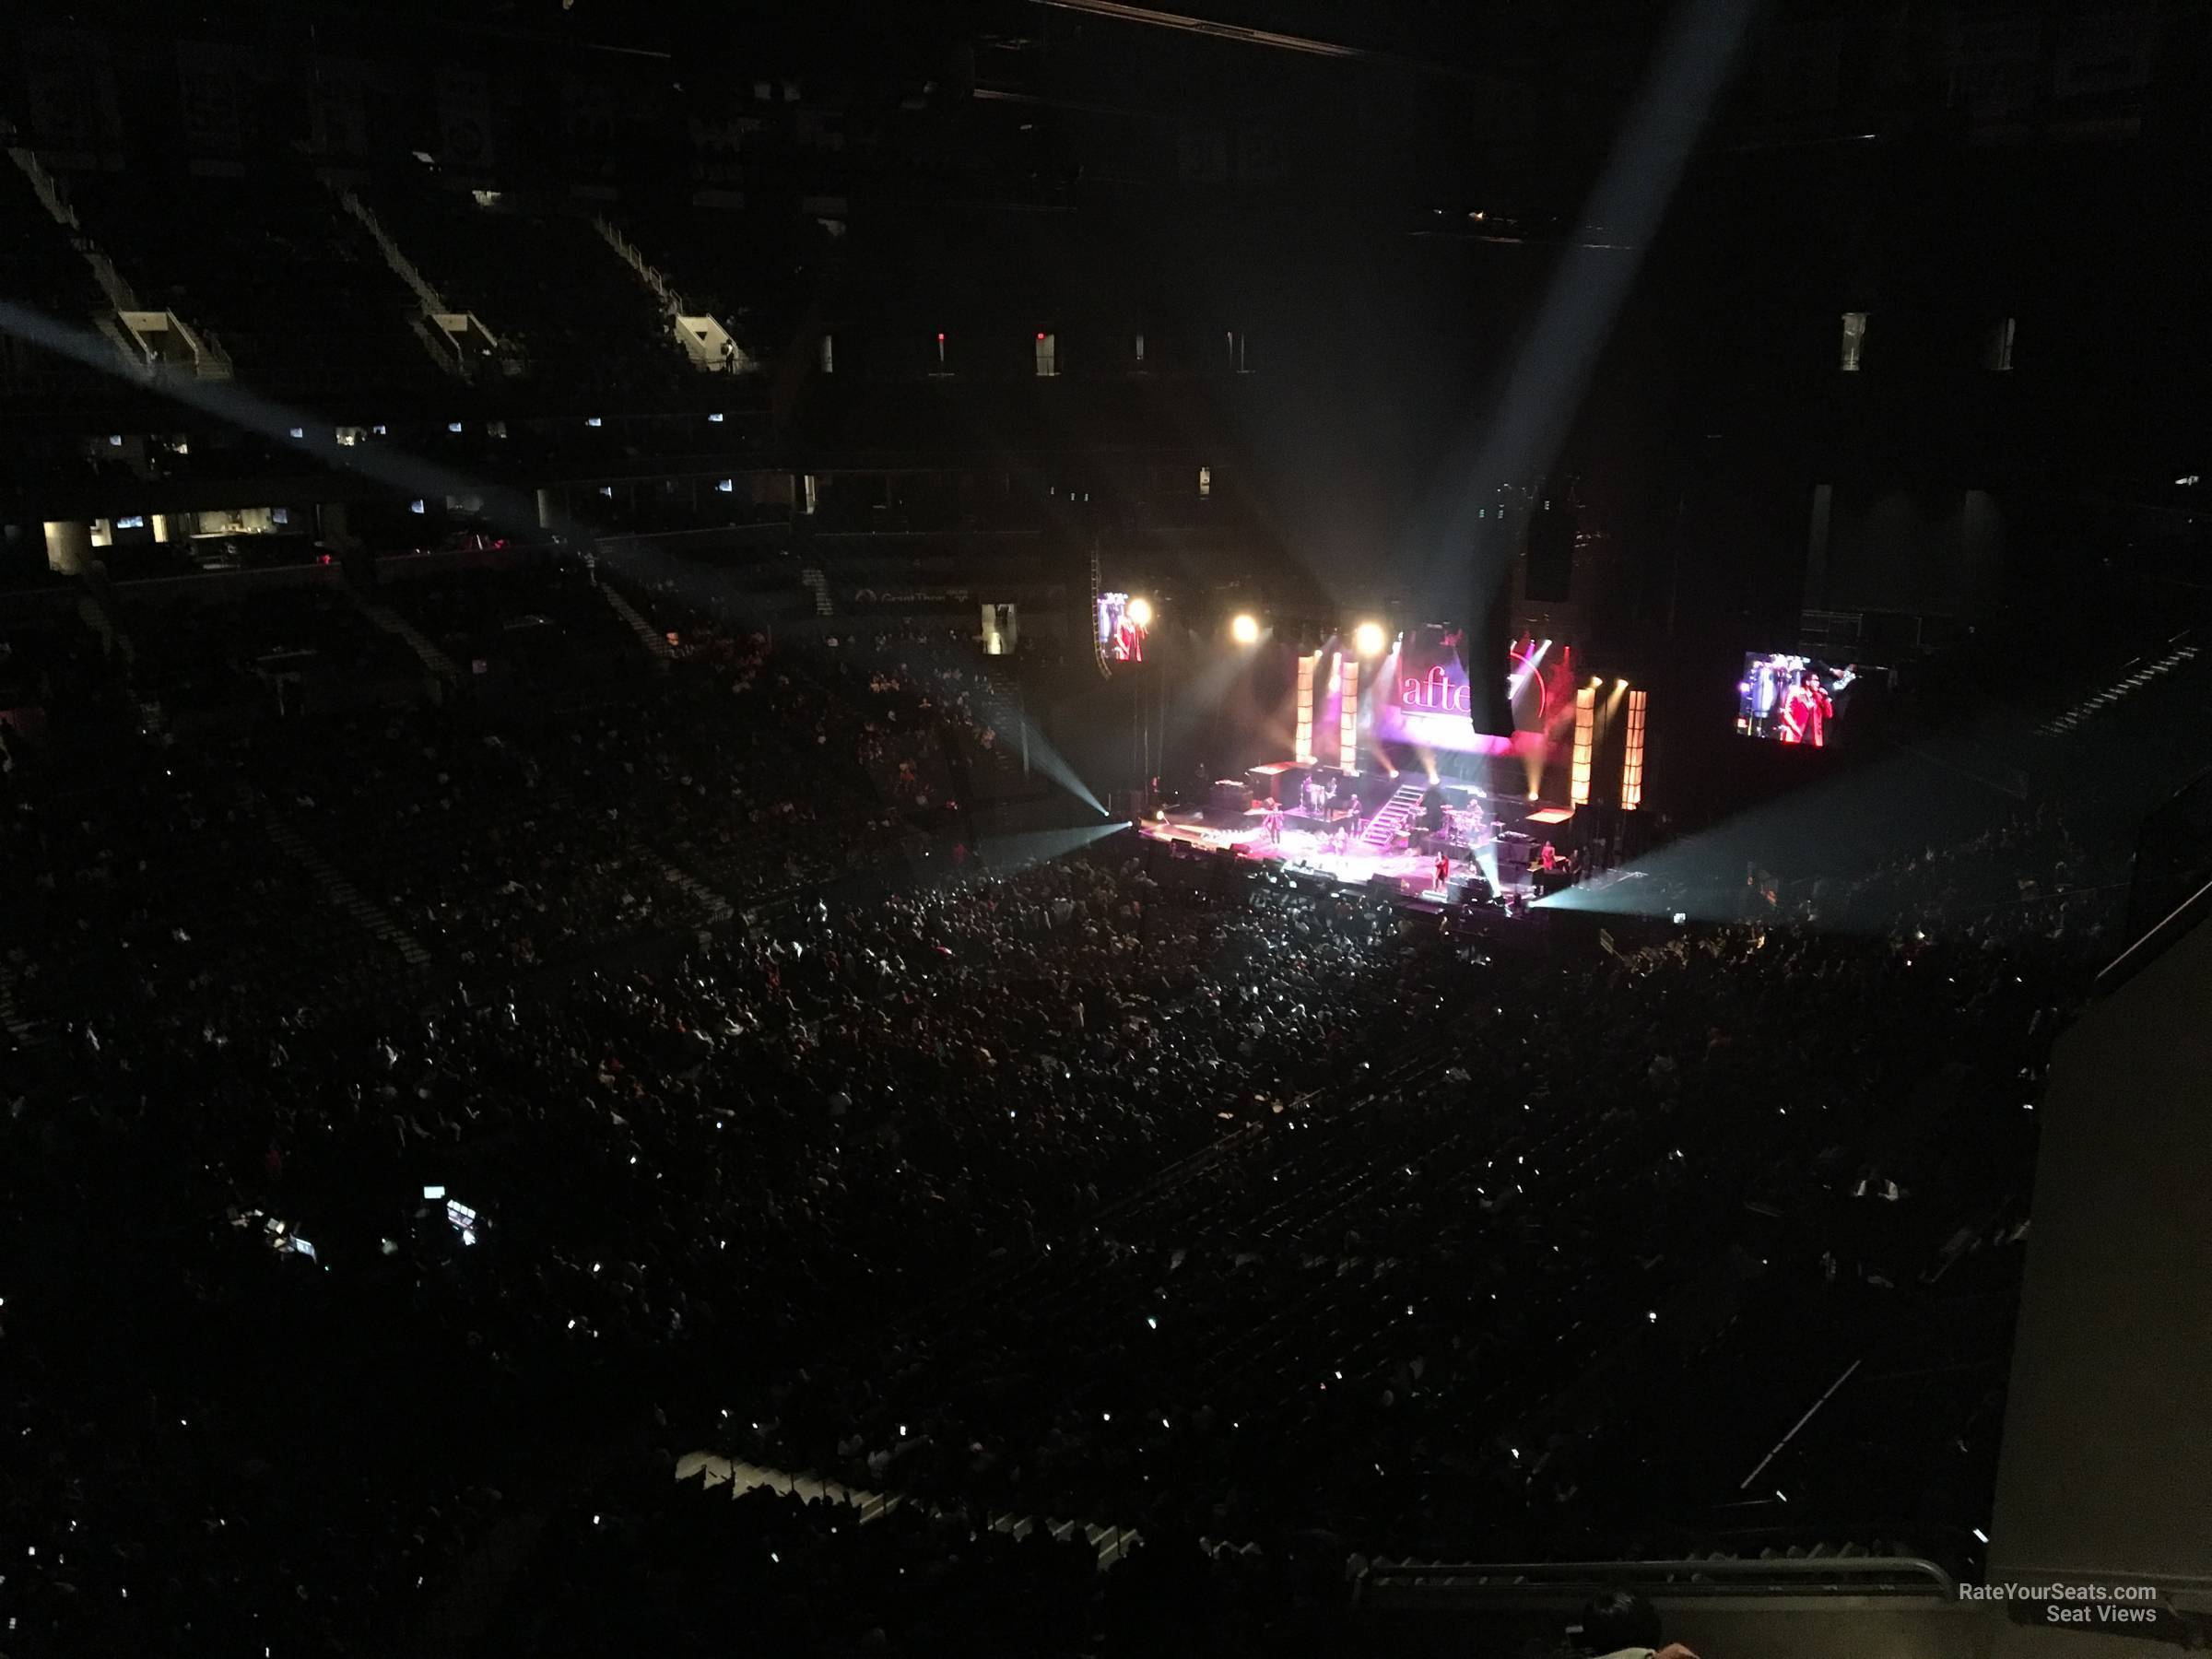 section 212, row 8 seat view  for concert - barclays center